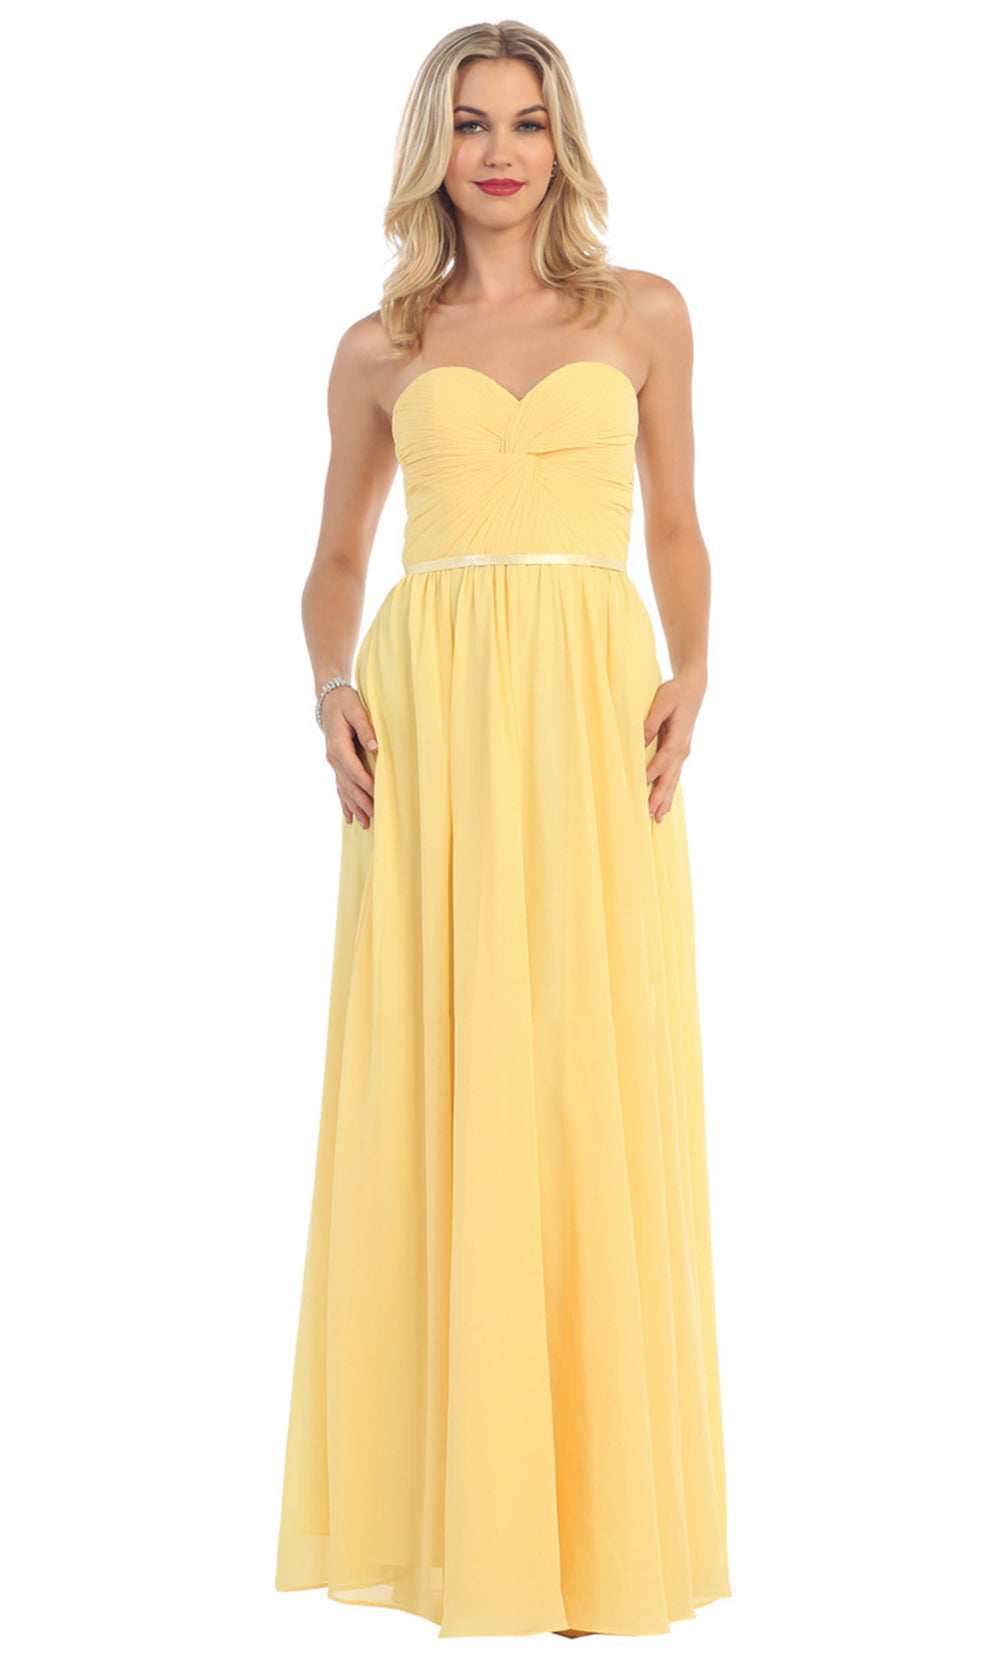 May Queen - MQ1145 Strapless Sweetheart A-Line Dress In Yellow